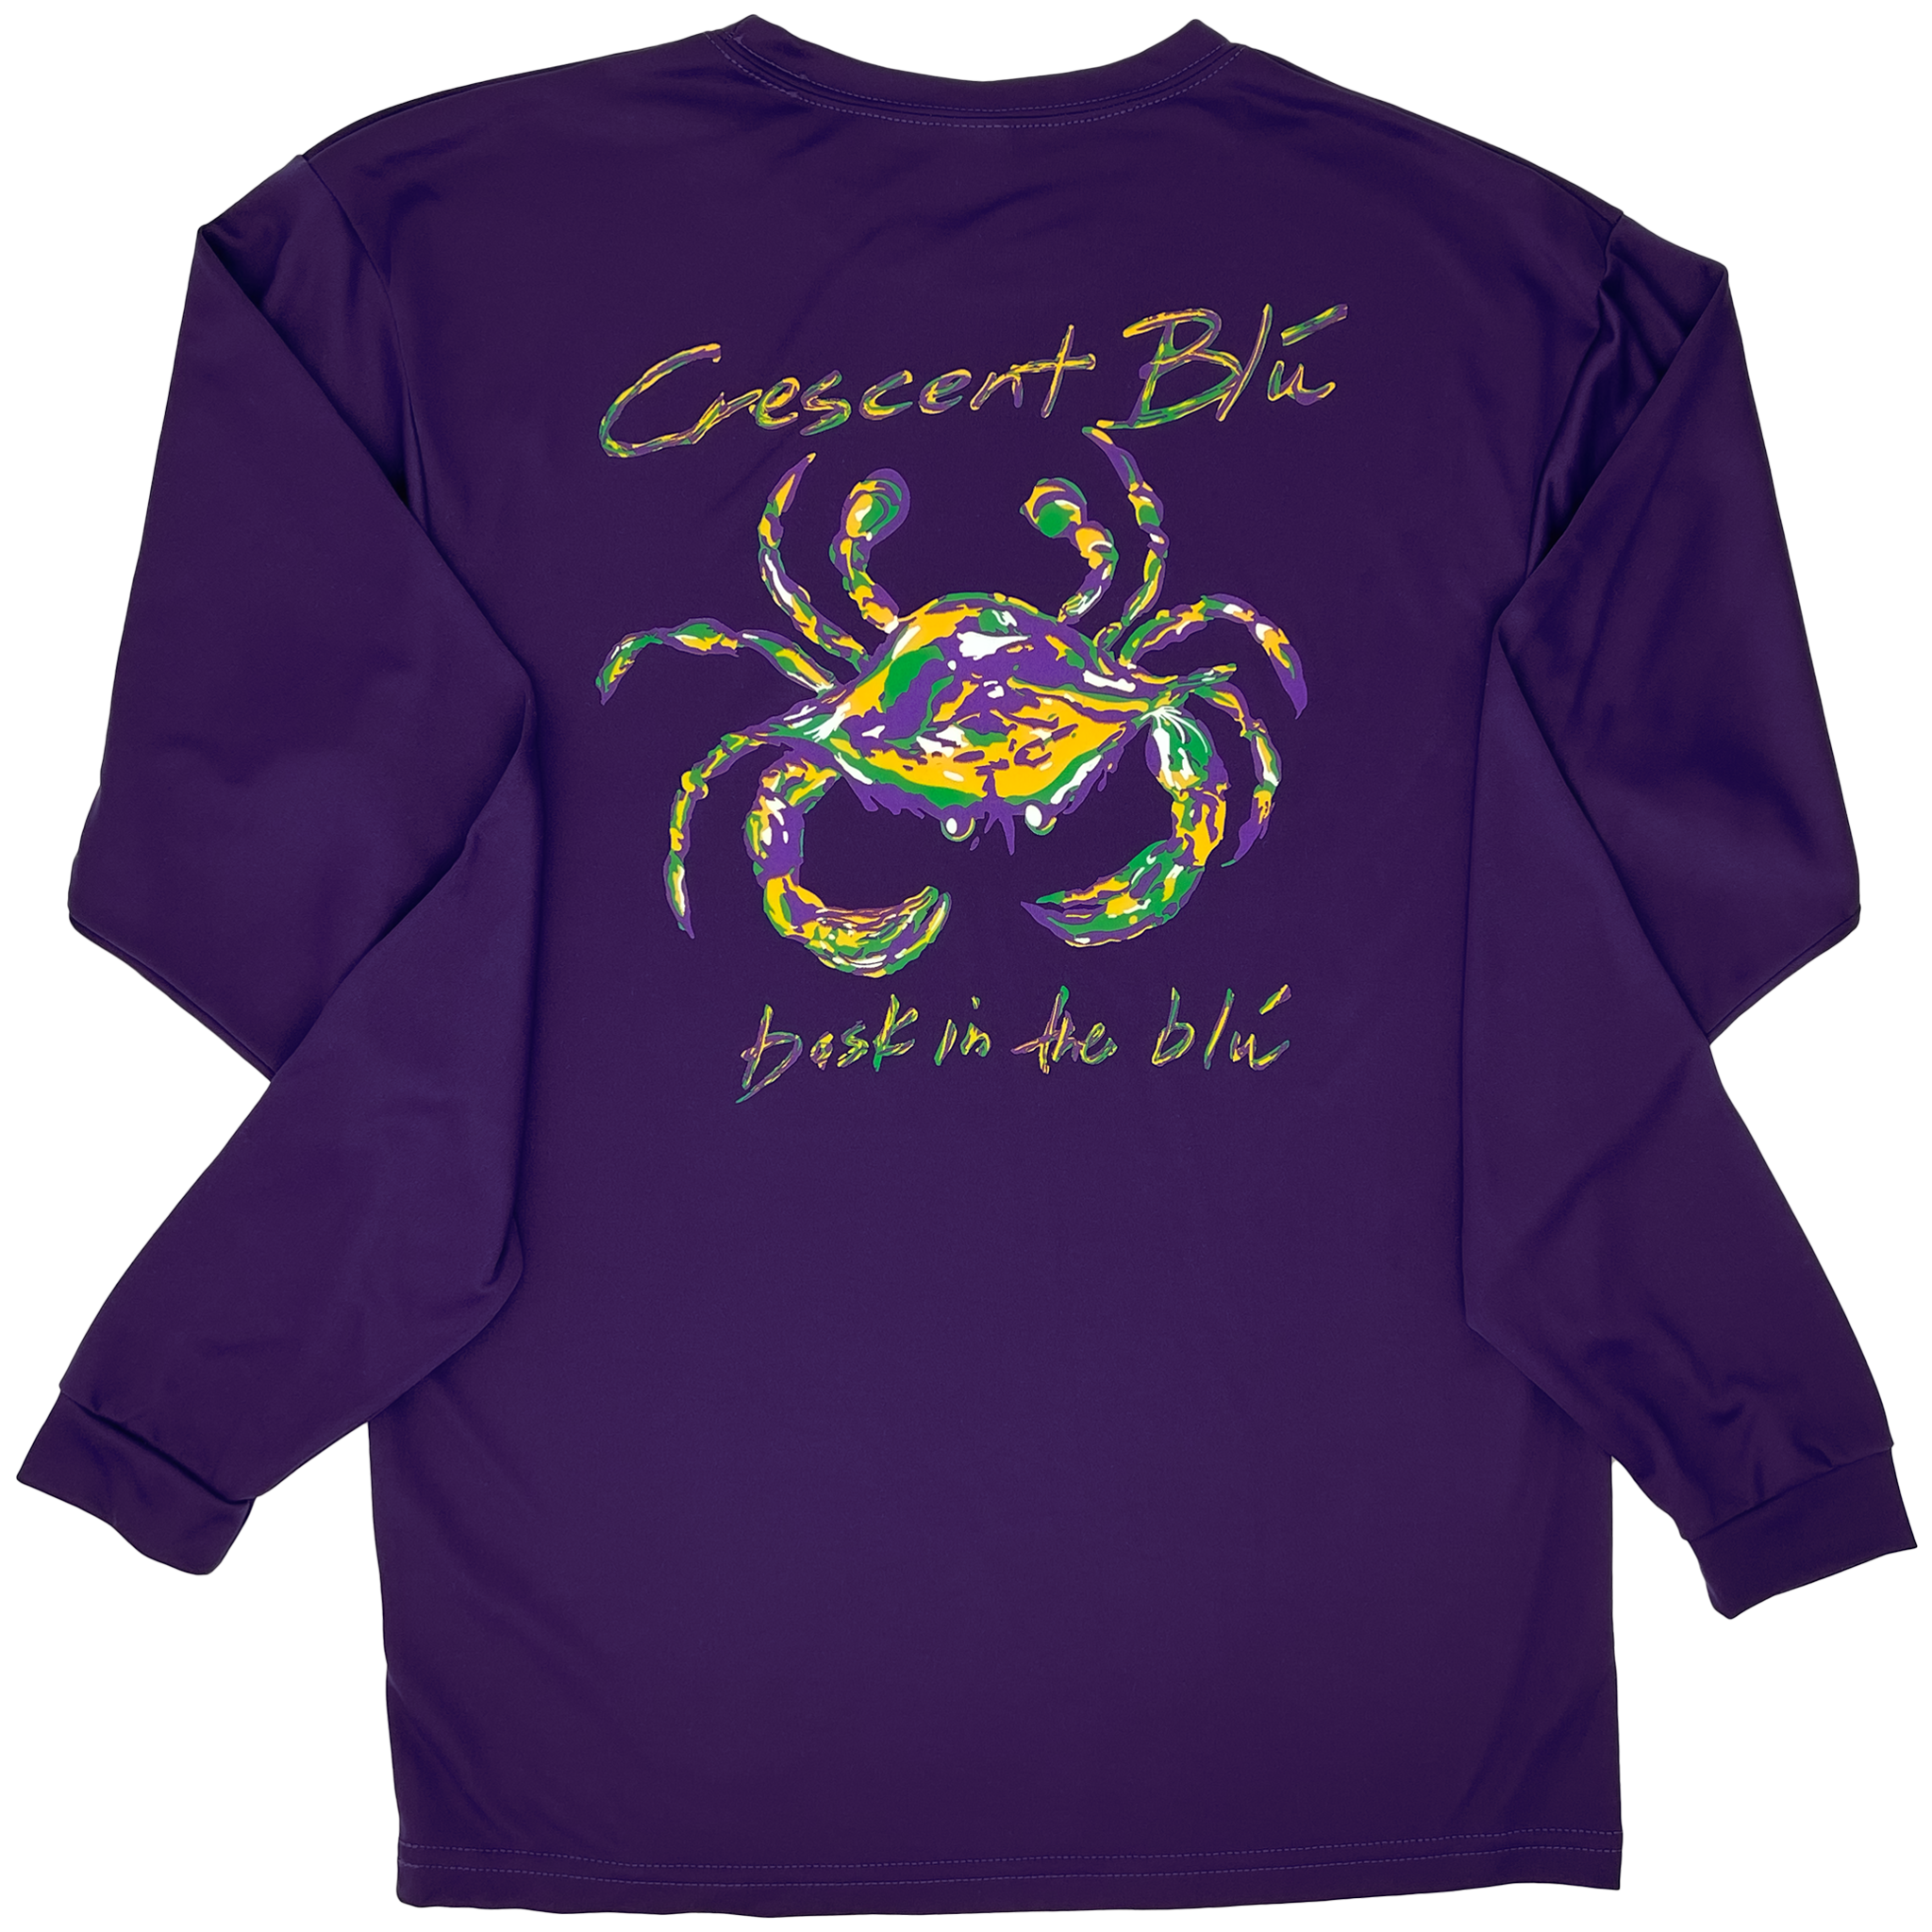 A long sleeve purple shirt with Crescent Blú written above  a purple, green, and gold crab with the words, "bask in the blu" on the bottom.